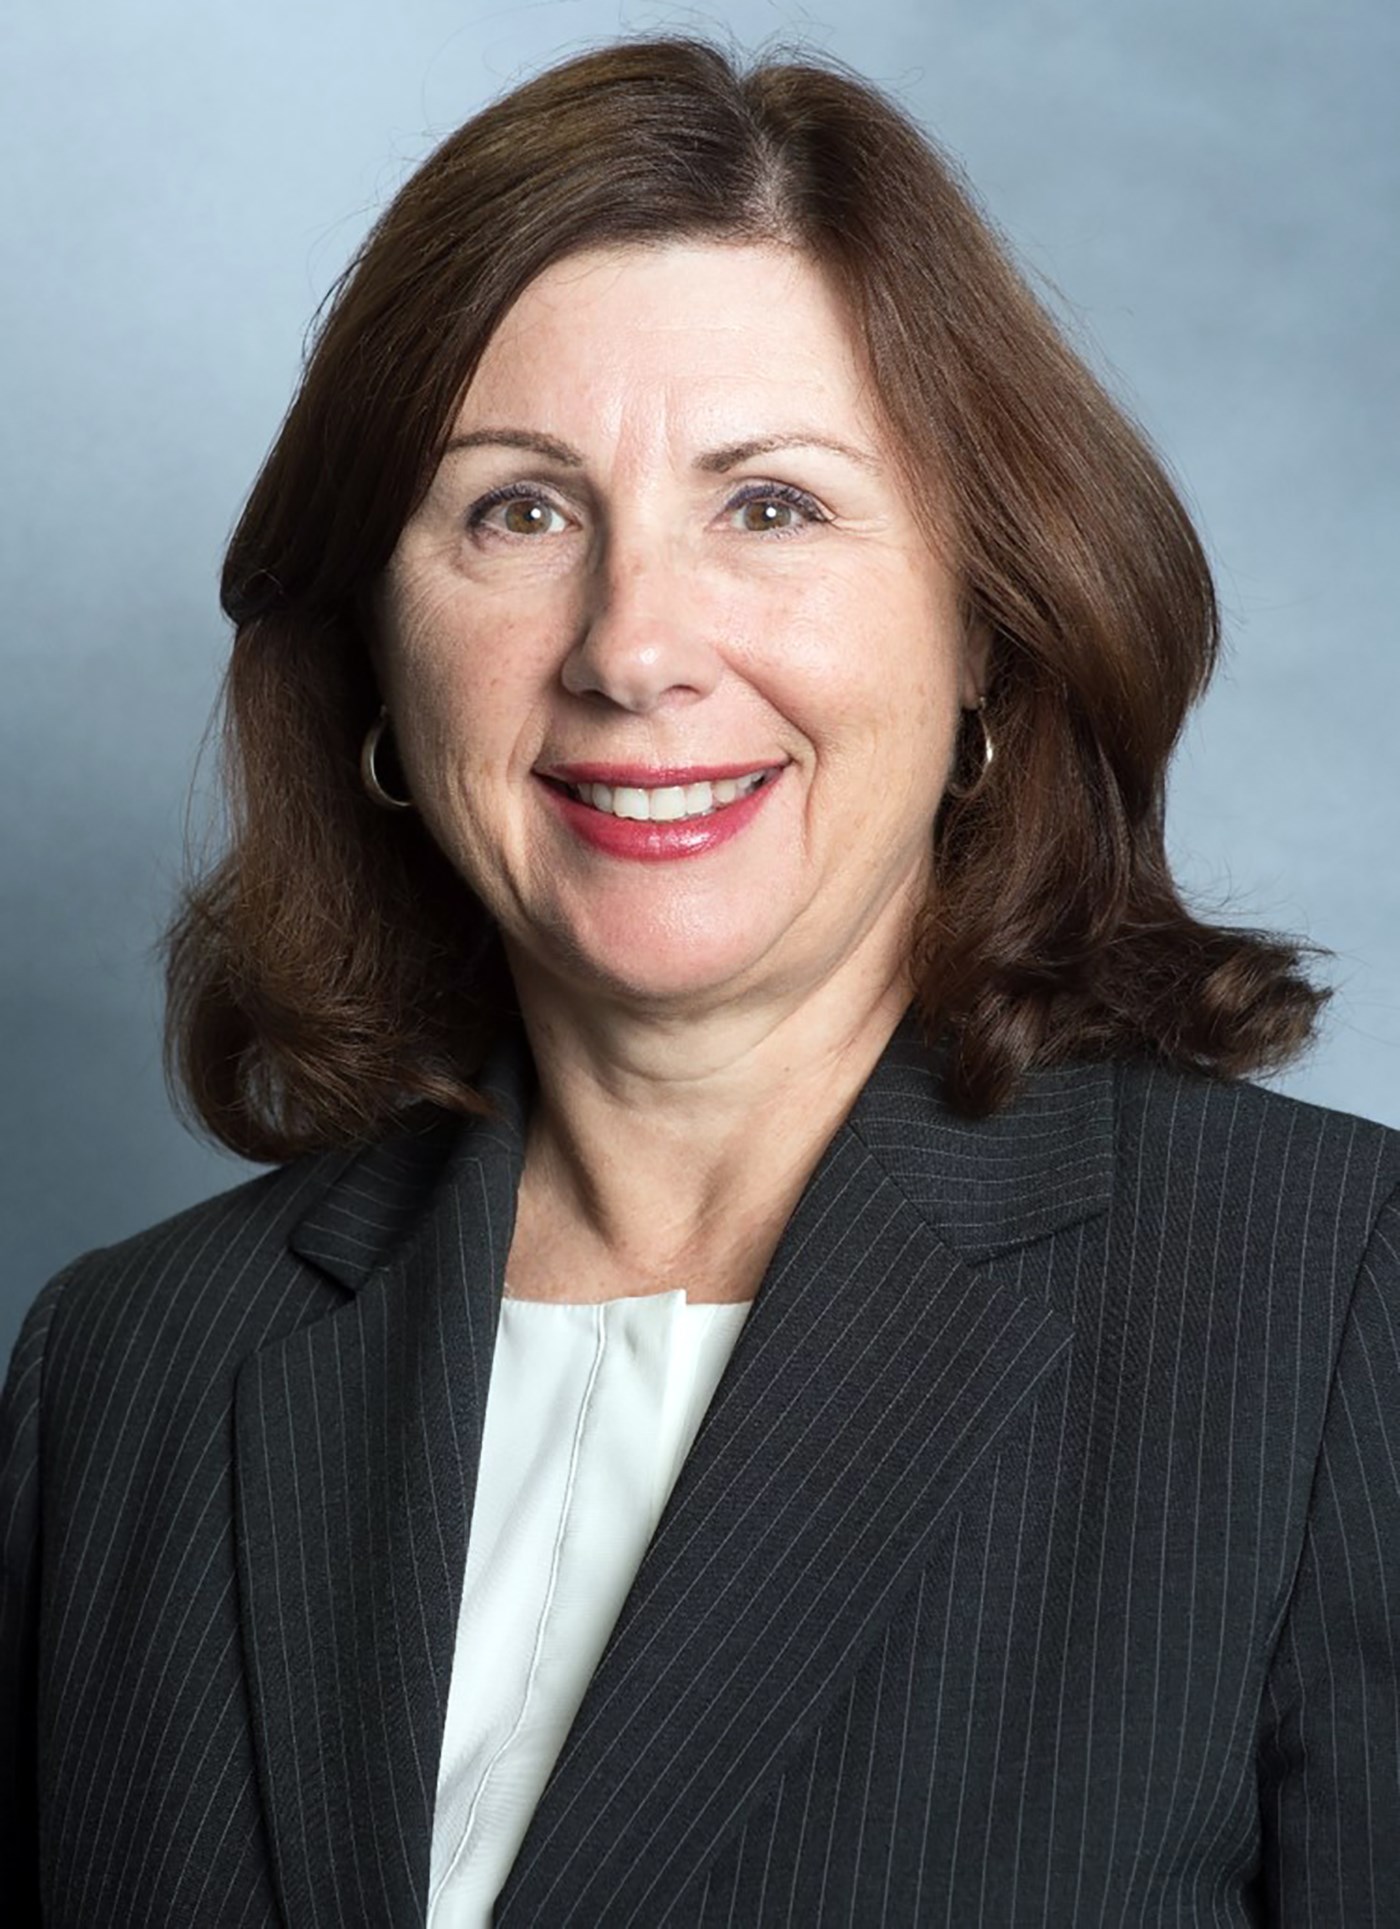 Arlene Parquette is the Associate Vice Chancellor, Industry Partnerships & Economic Development at UMass Lowell.